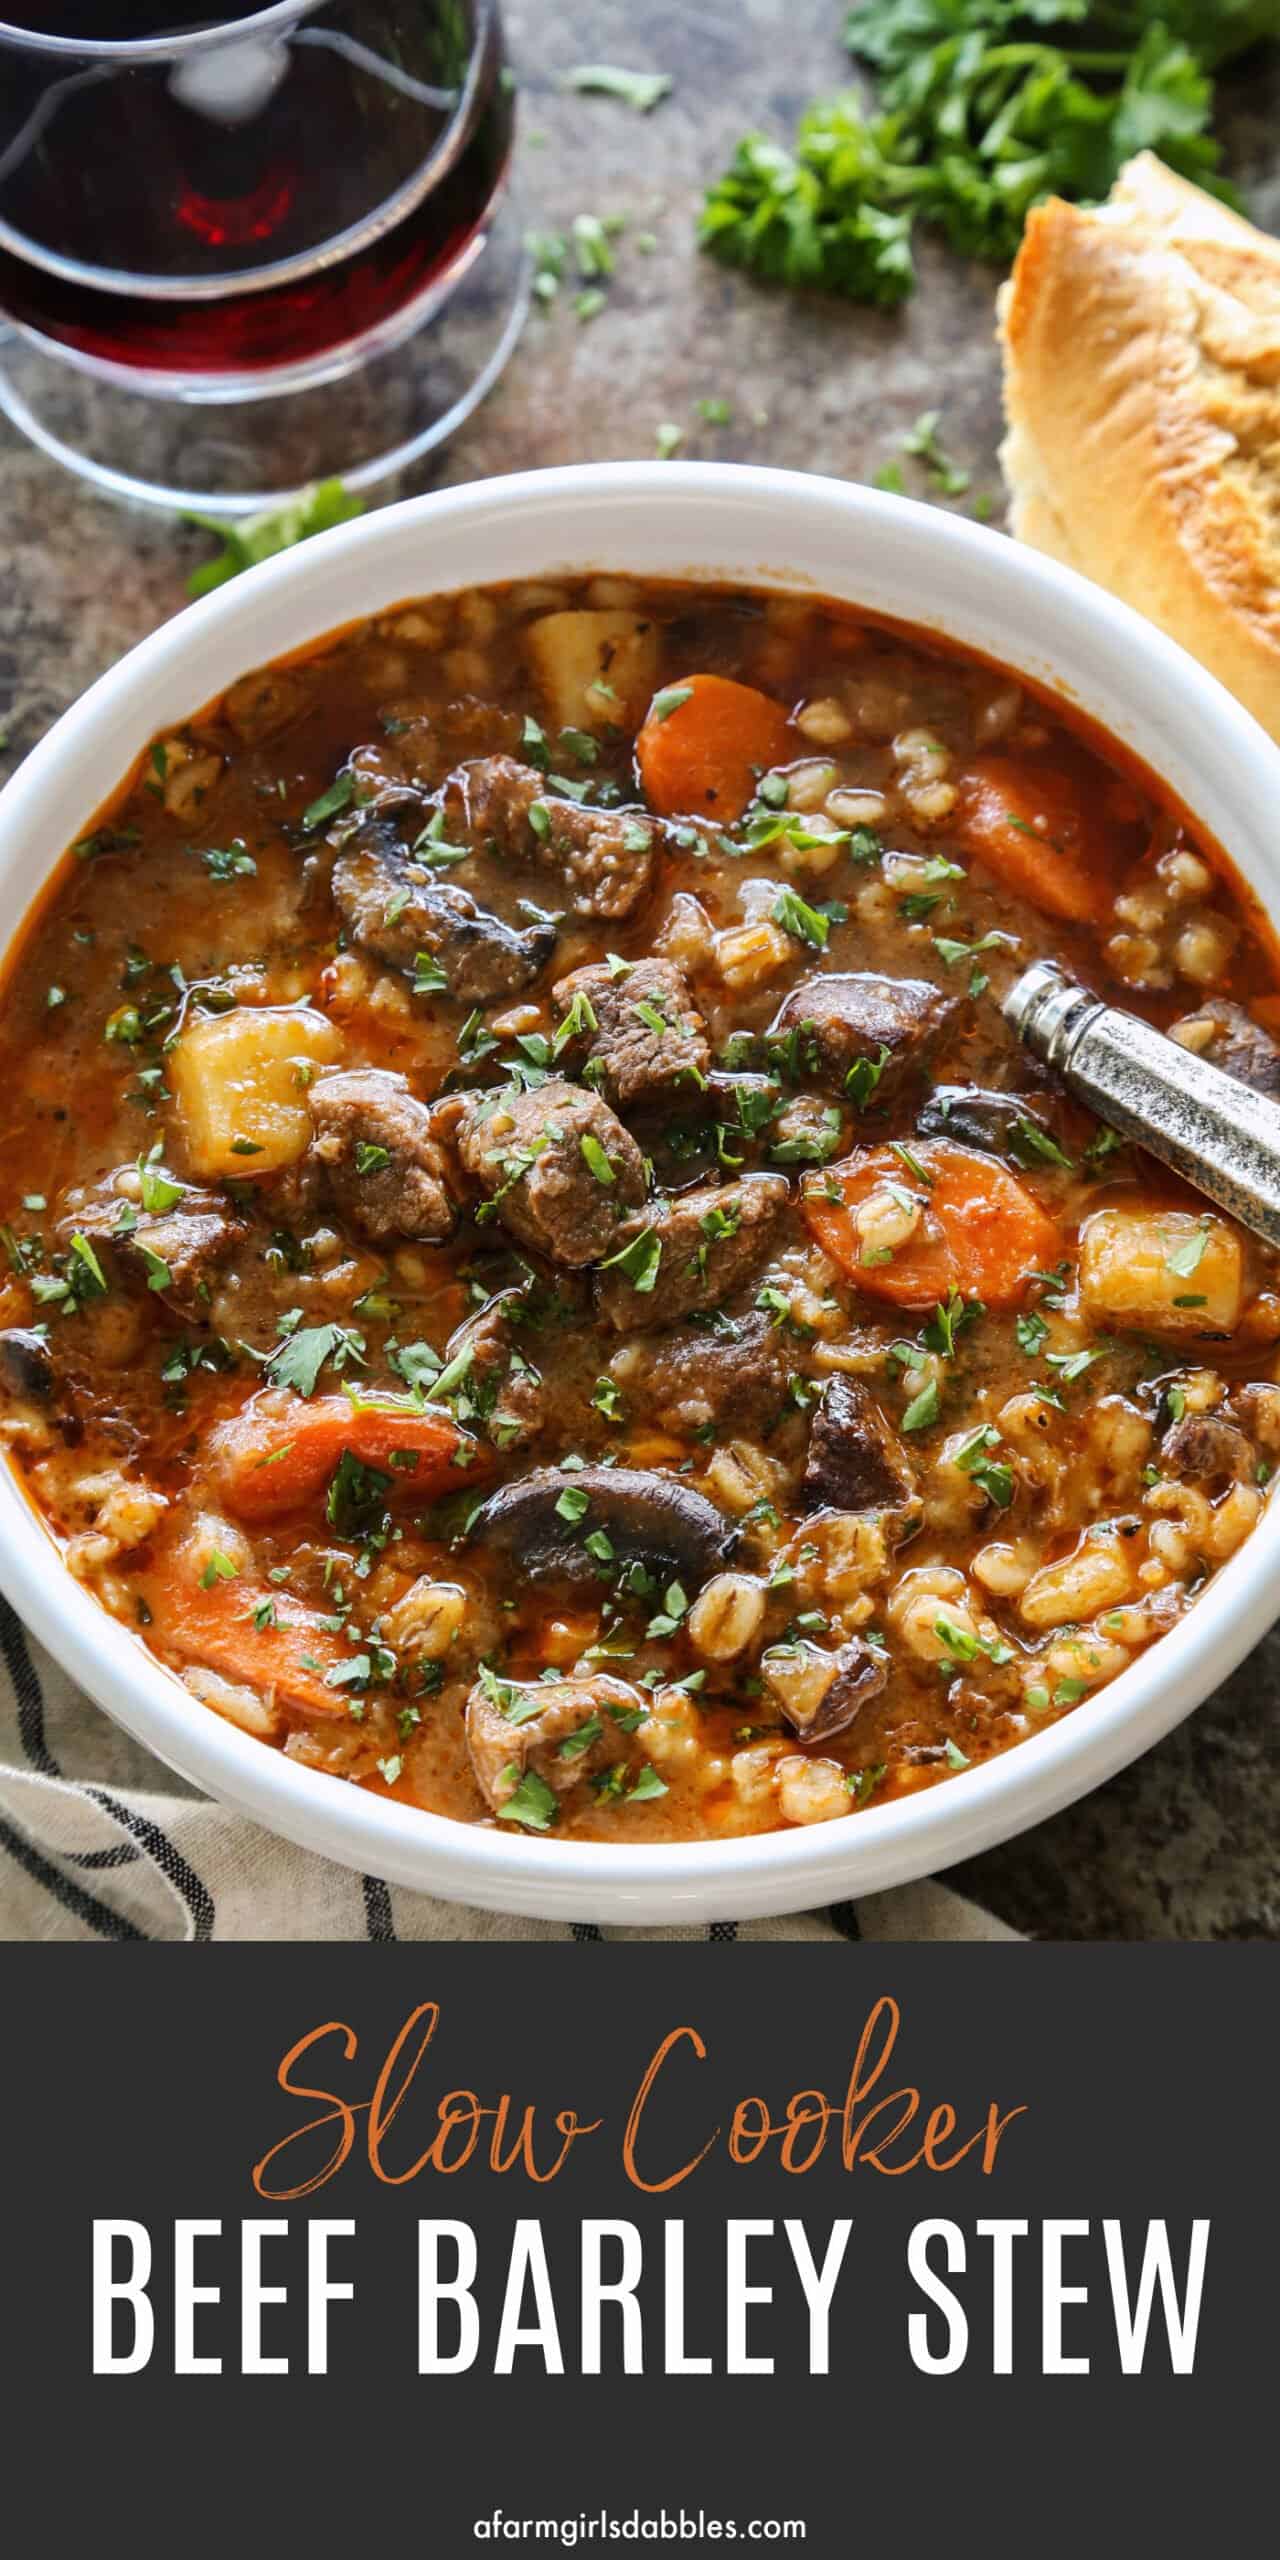 stew made from beef, barley, carrots, potatoes and mushrooms, in a white bowl